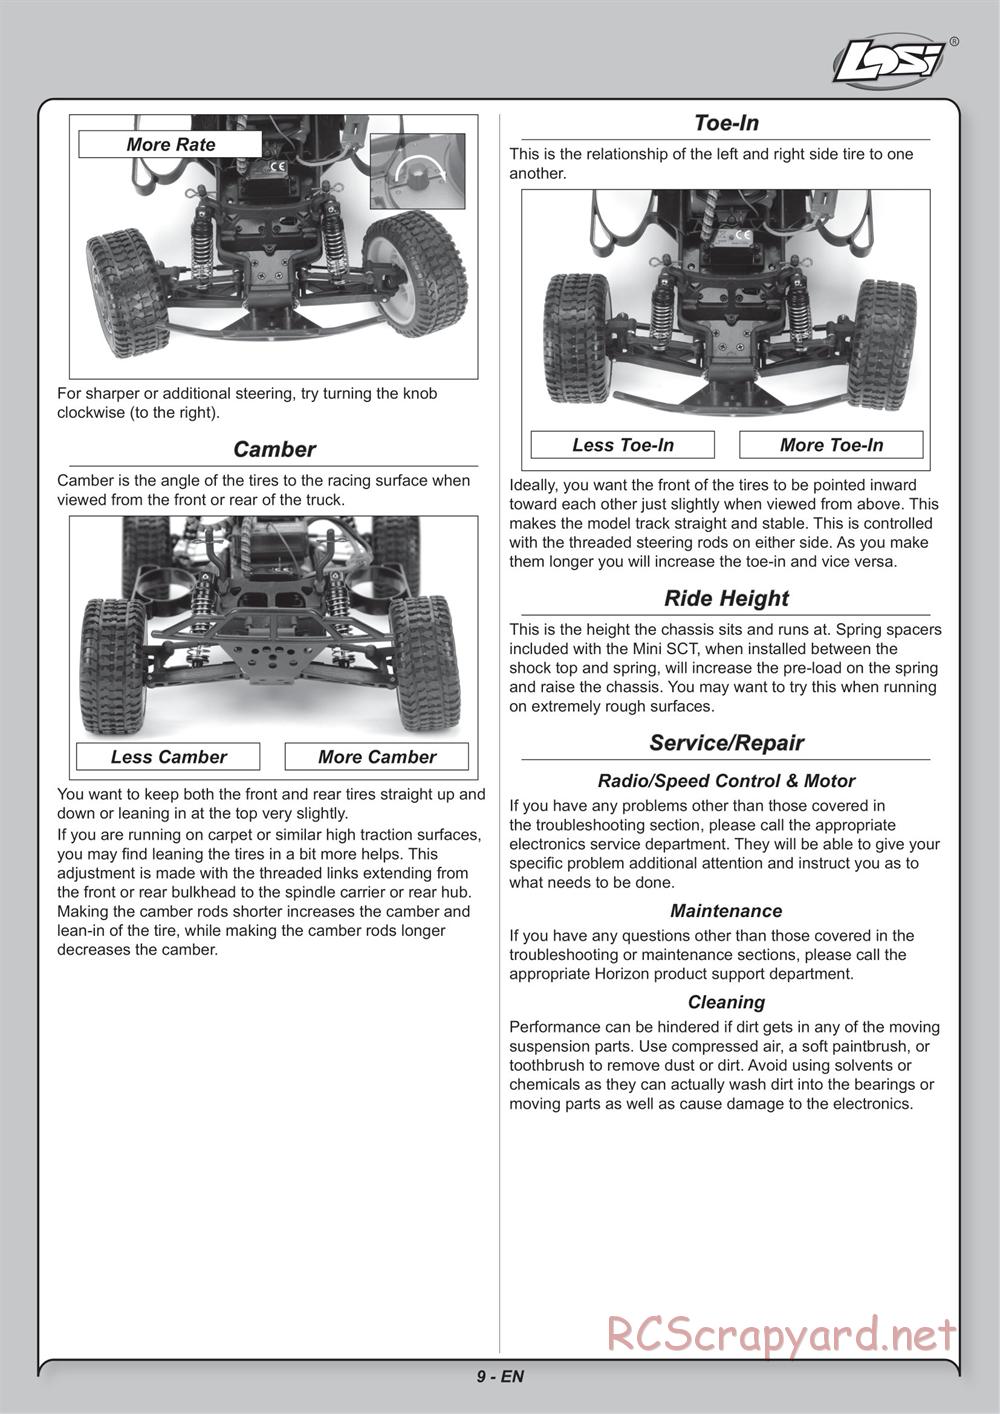 Team Losi - Mini Stronghold SCT - Manual - Page 9